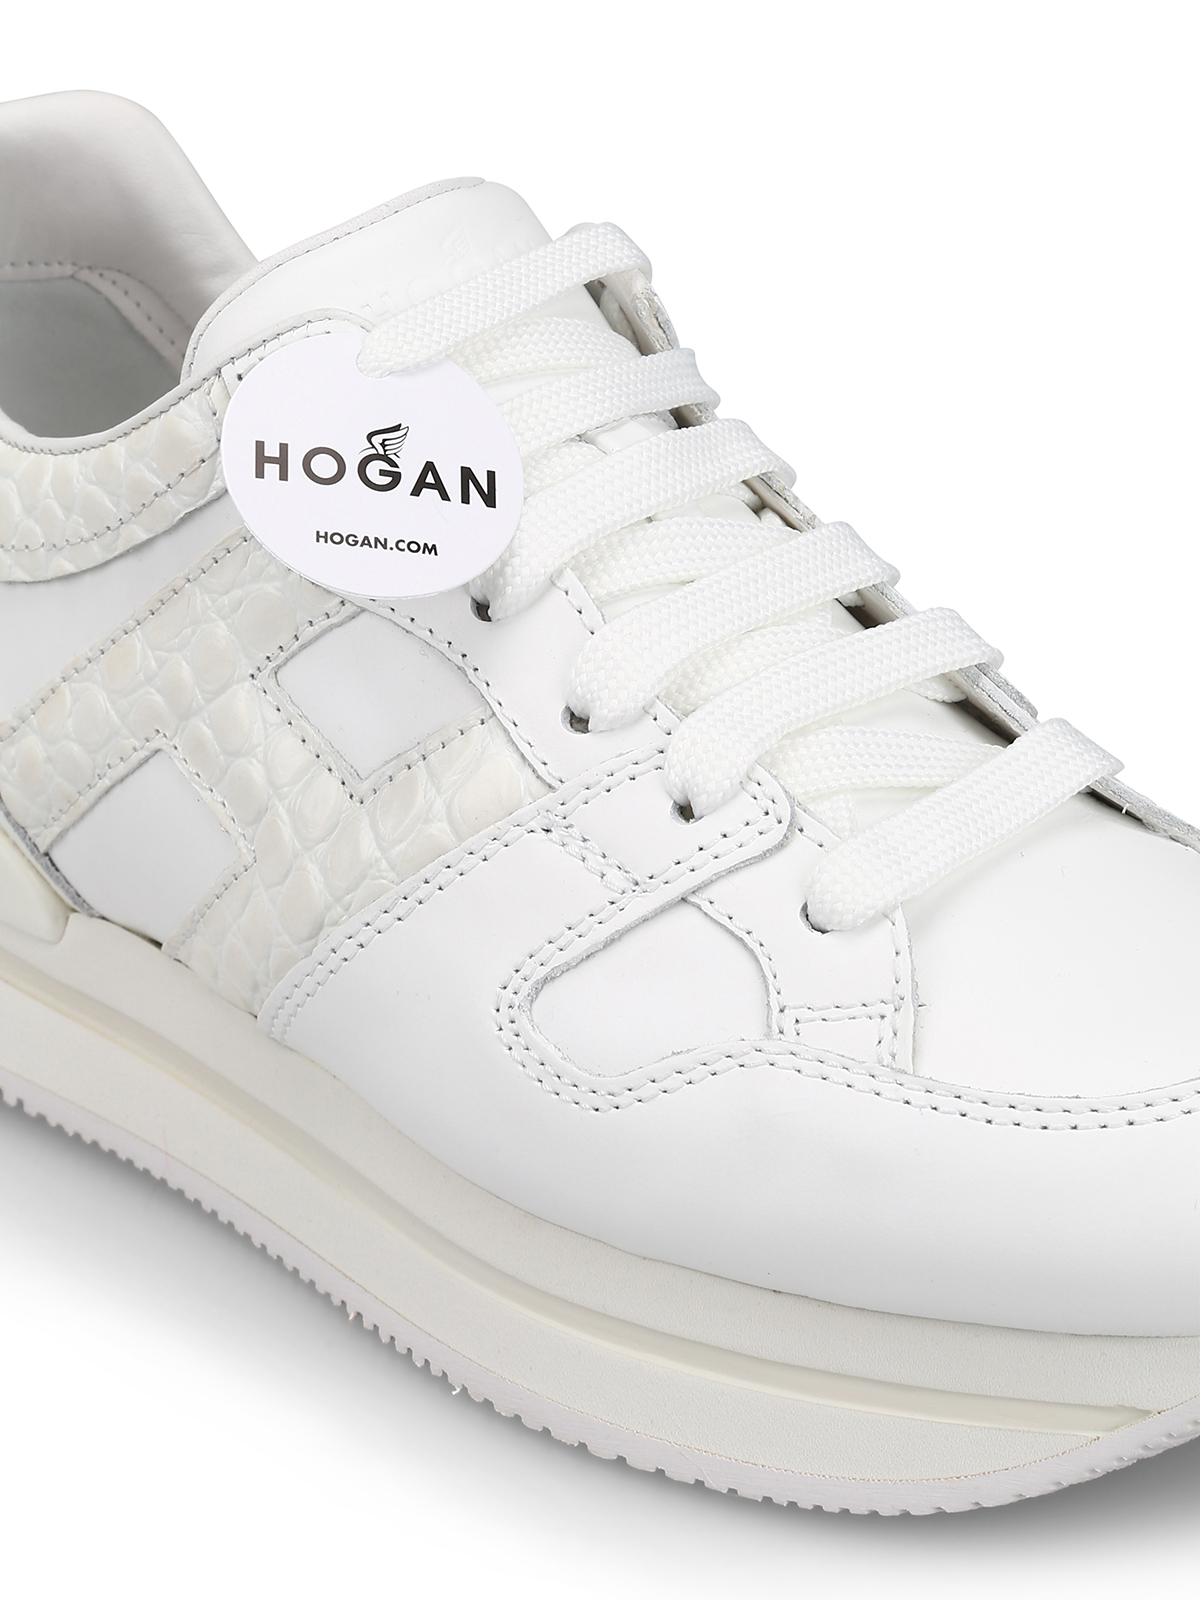 Trainers Hogan - H222 white leather sneakers - HXW2220T548KGKB001